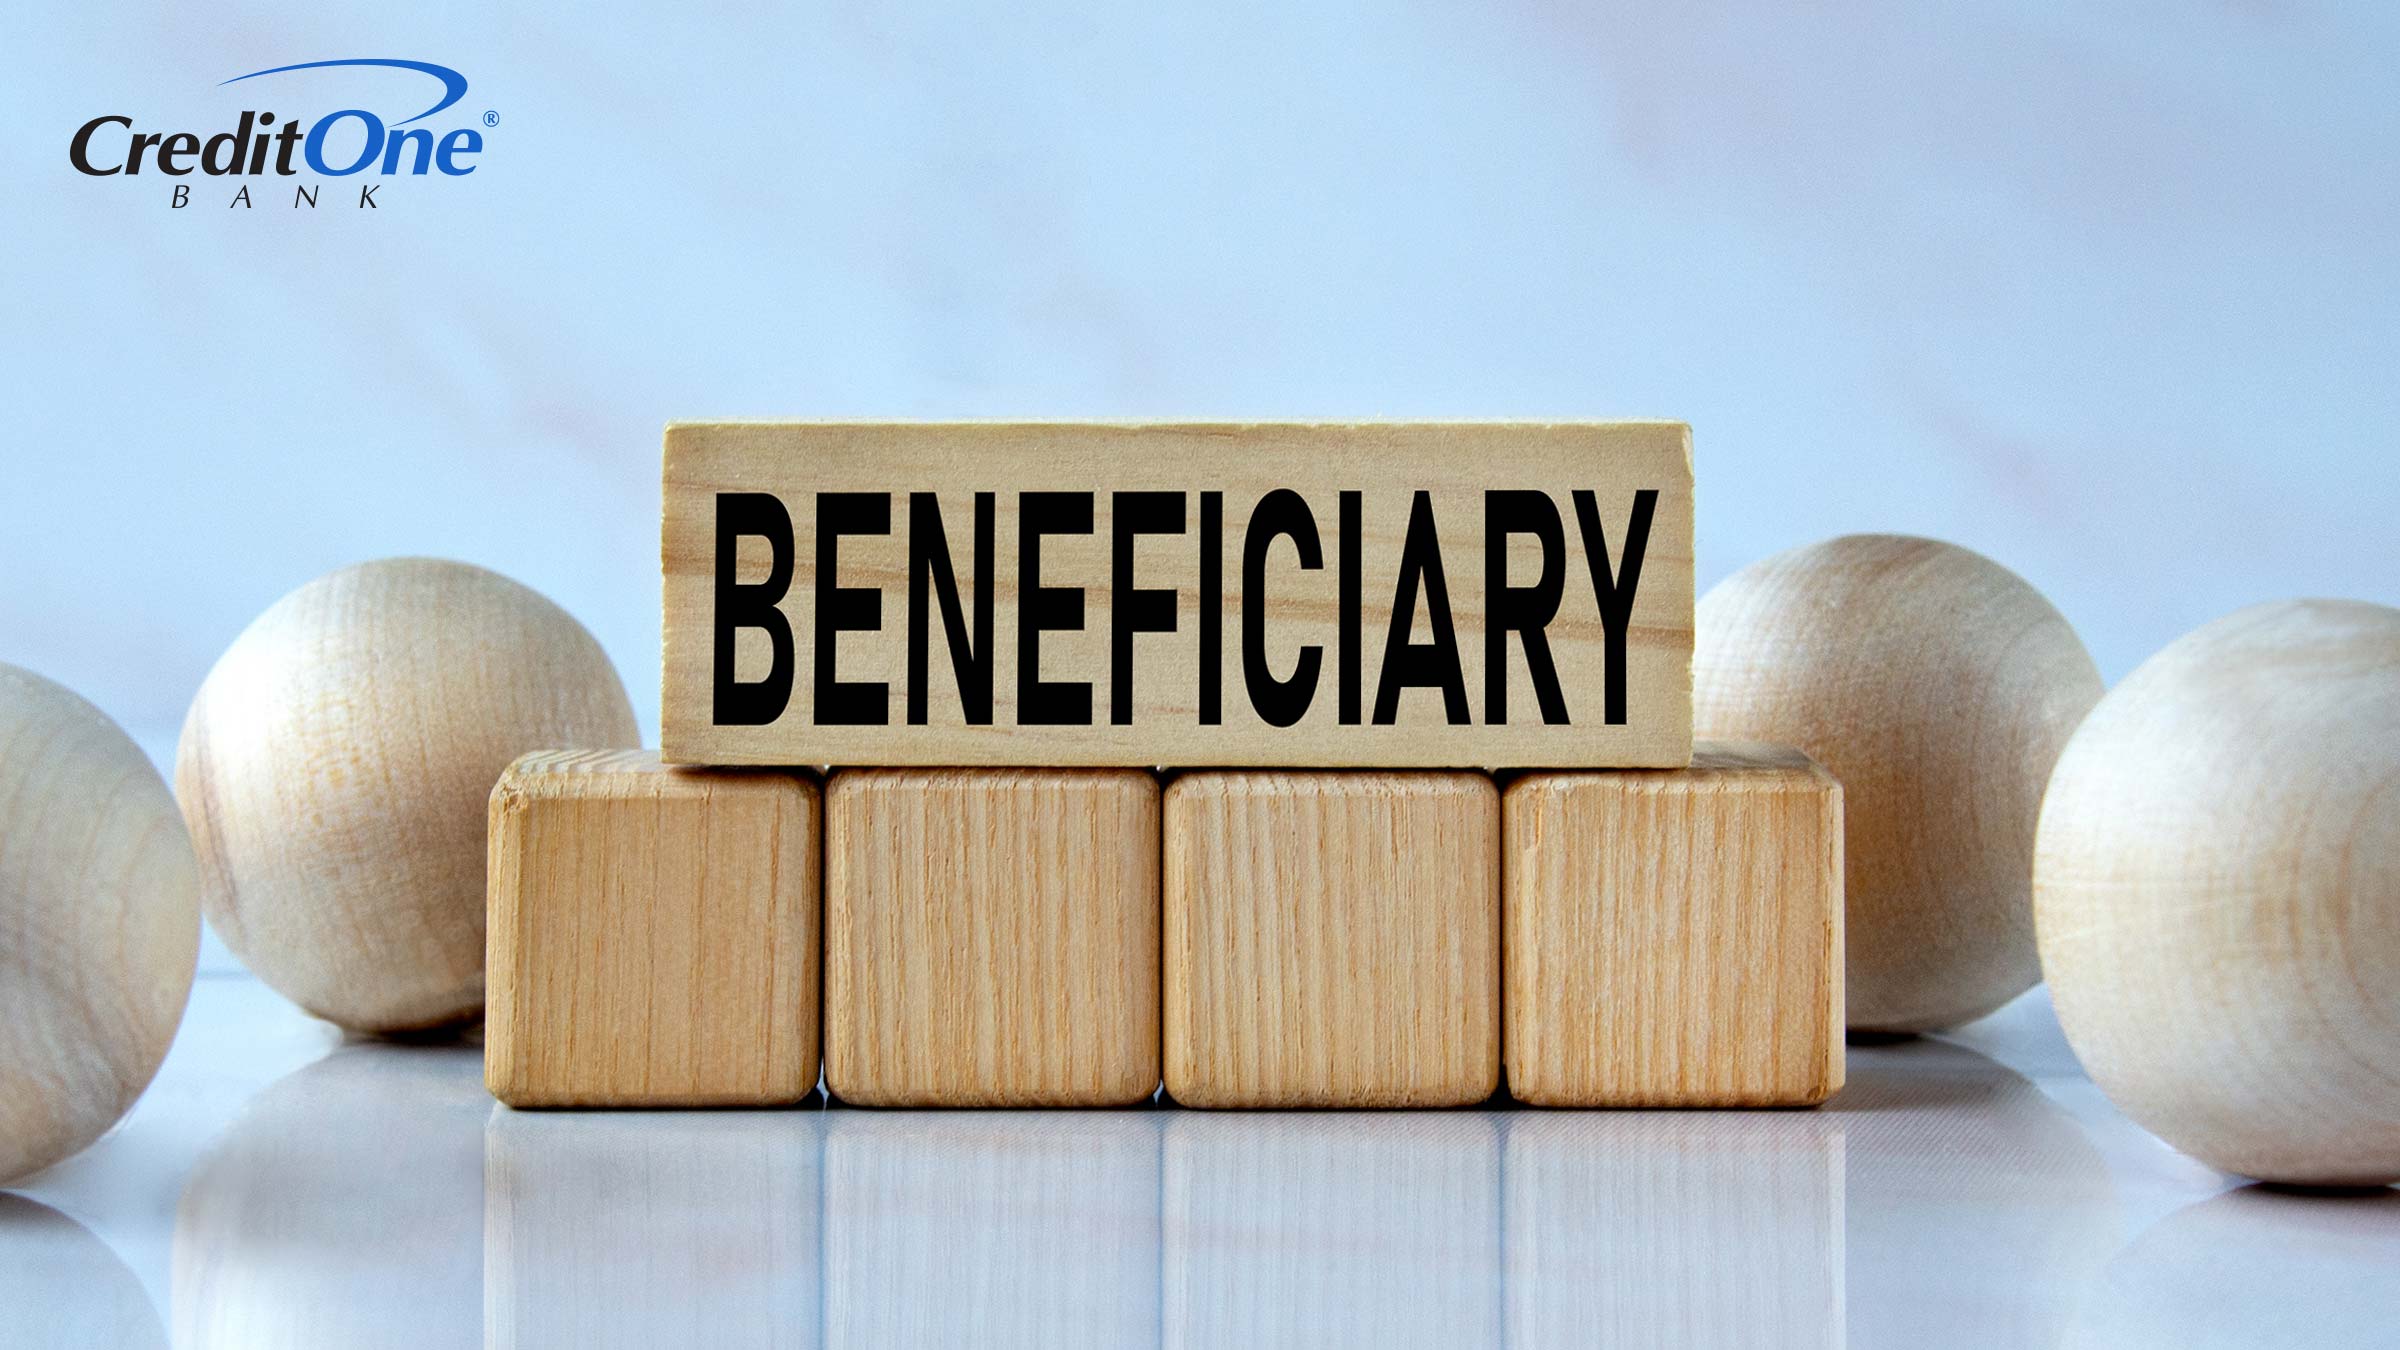 The word “beneficiary” is spelled out on a stack of wooden blocks representing the security-building benefits of adding a beneficiary.